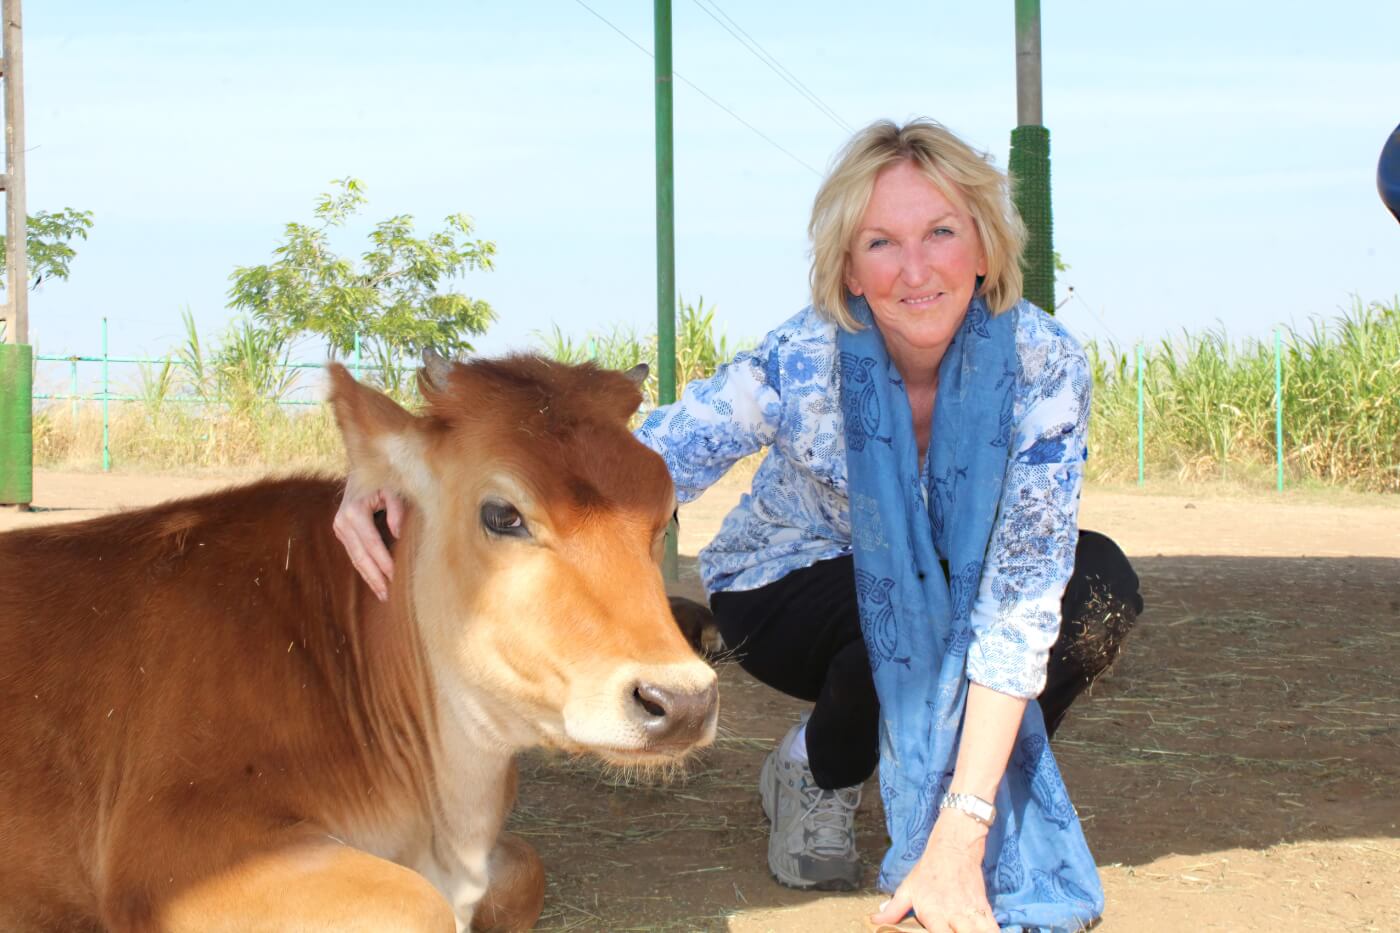 PETA founder Ingrid Newkirk with a cow